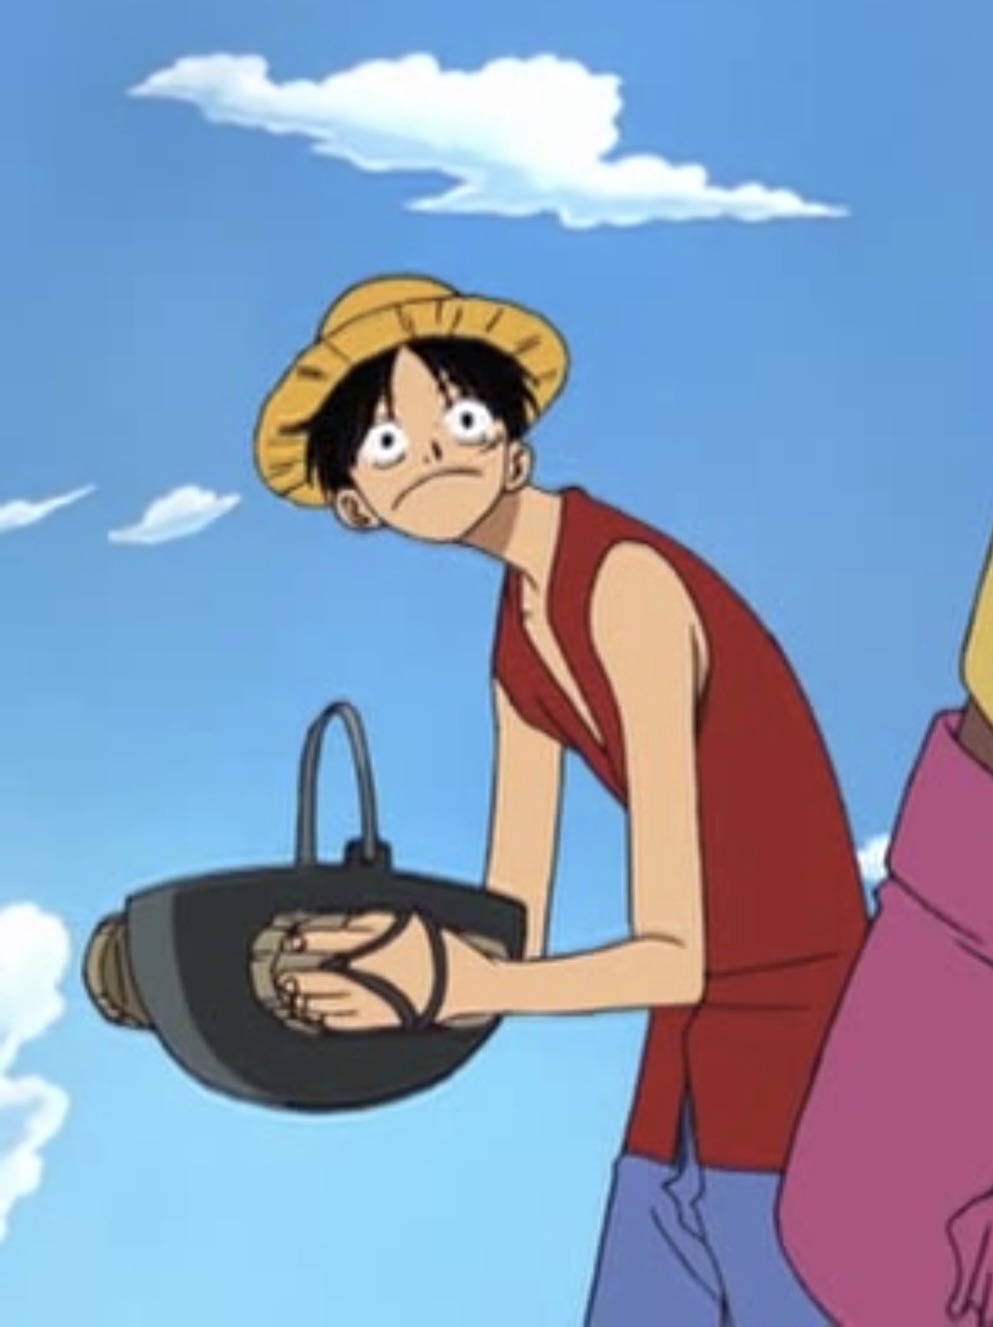 one piece side blog — using his flip flops like oven mitts